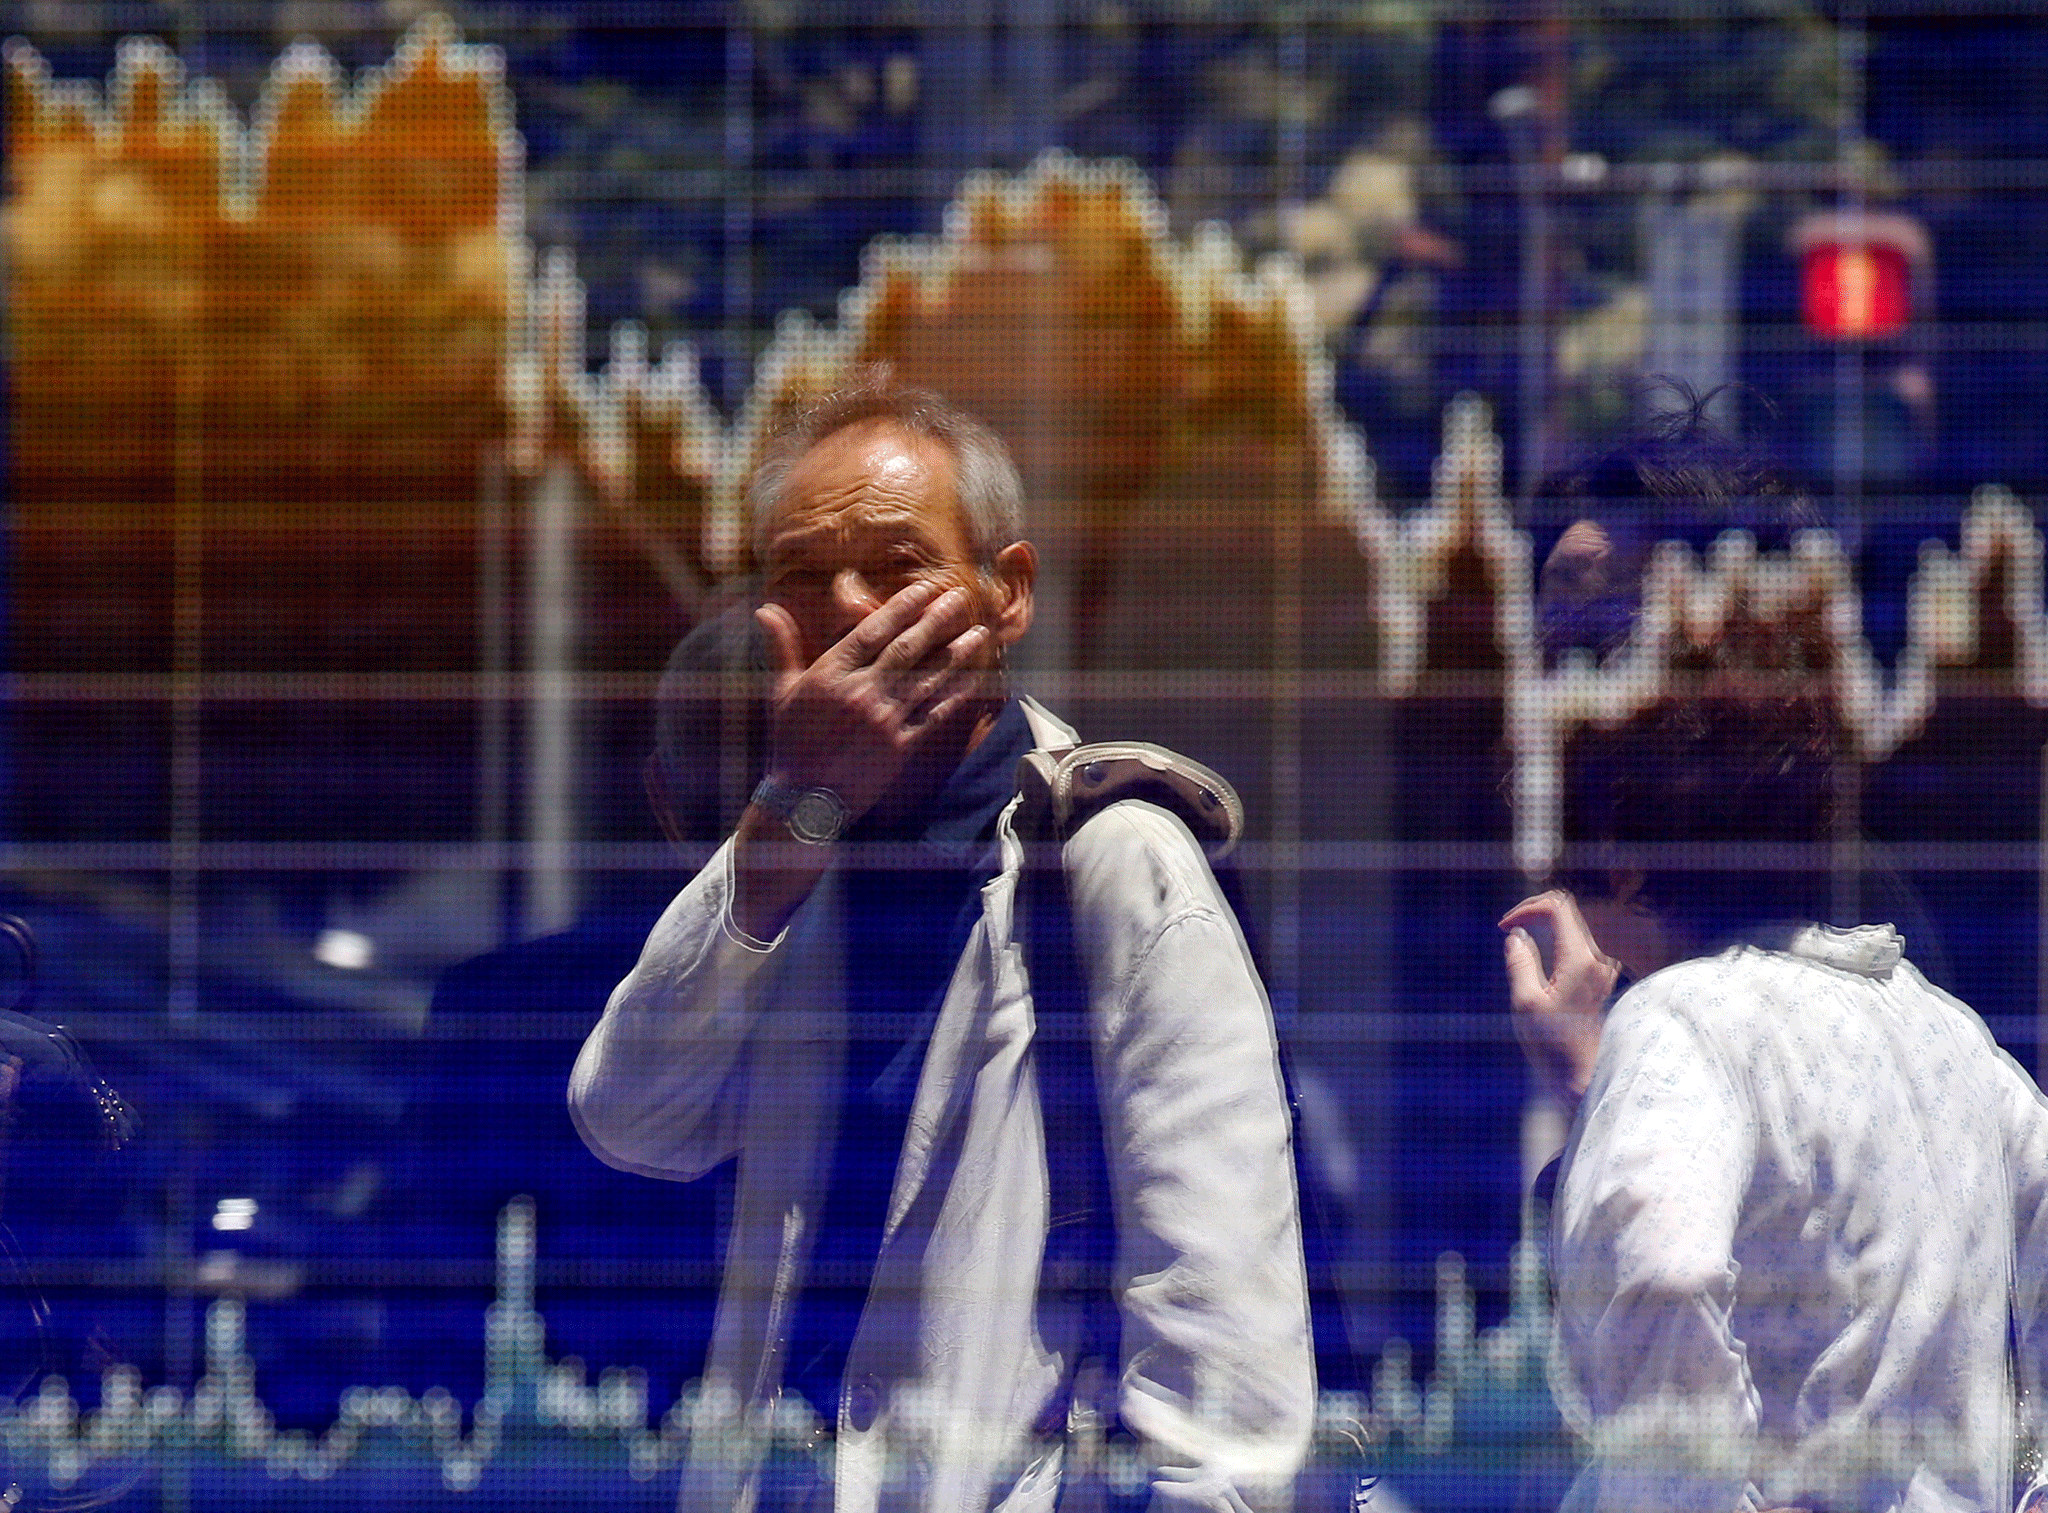 Stock market traders reacting to financial news in Japan